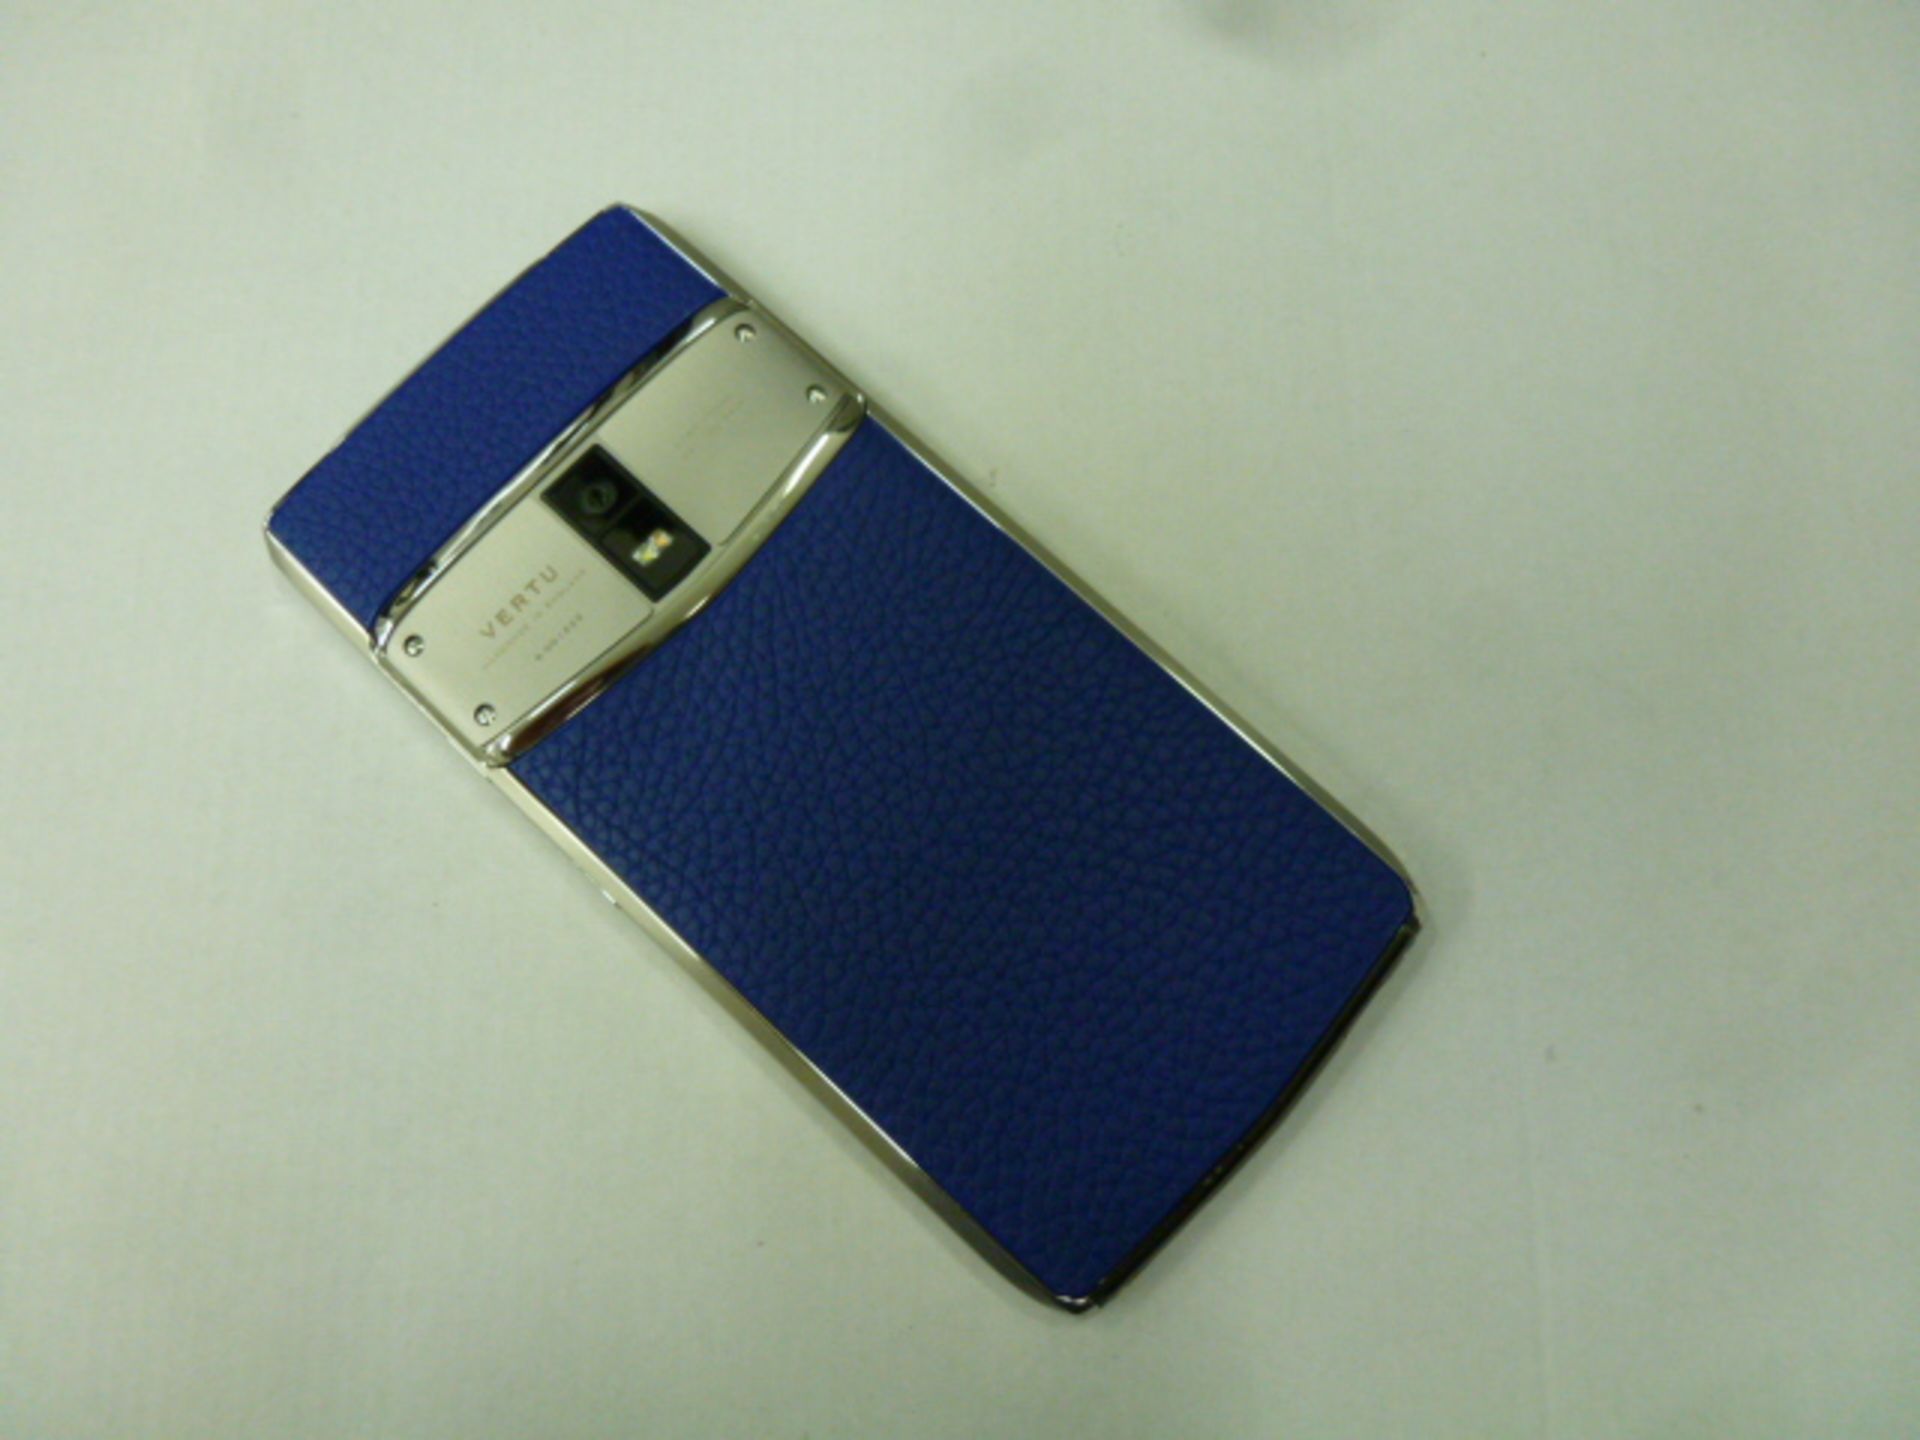 Vertu Tron Touch Phone, Blue Leather back. Unused Demonstrator, s/n 8-001222. Comes in Sales Box - Image 2 of 2